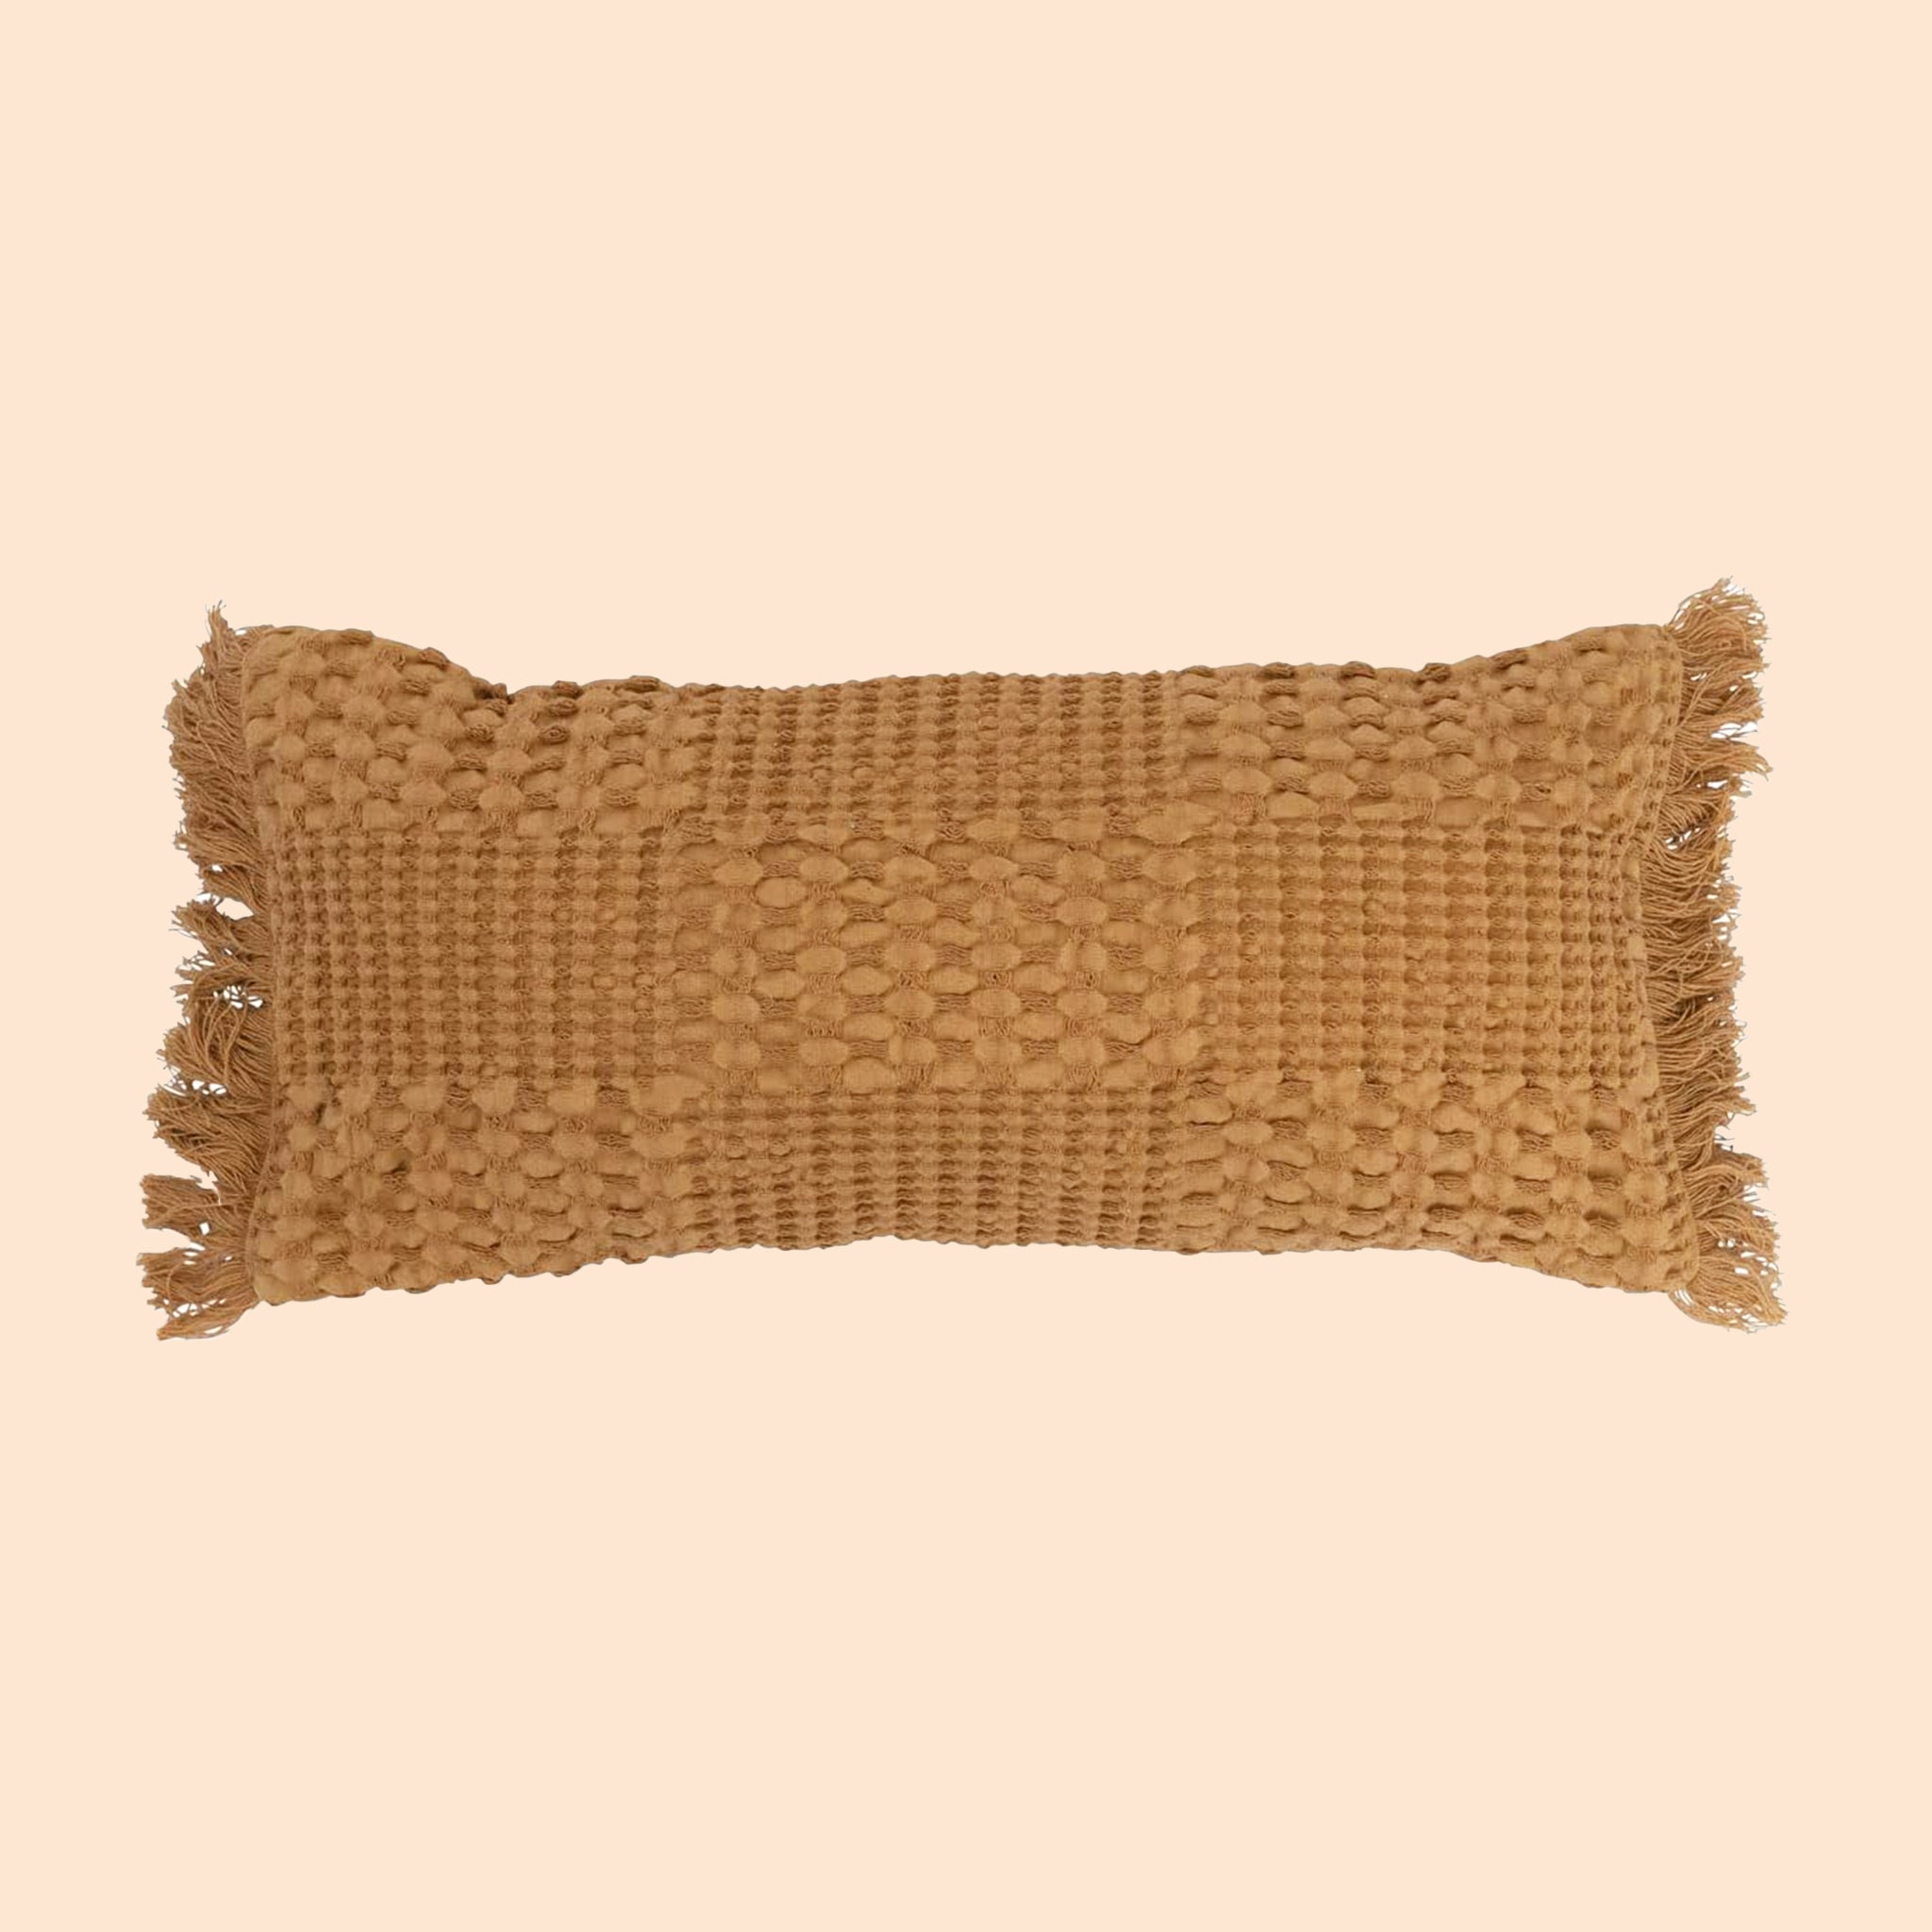 A toffee colored woven lumbar pillow with fringe details on each end. 